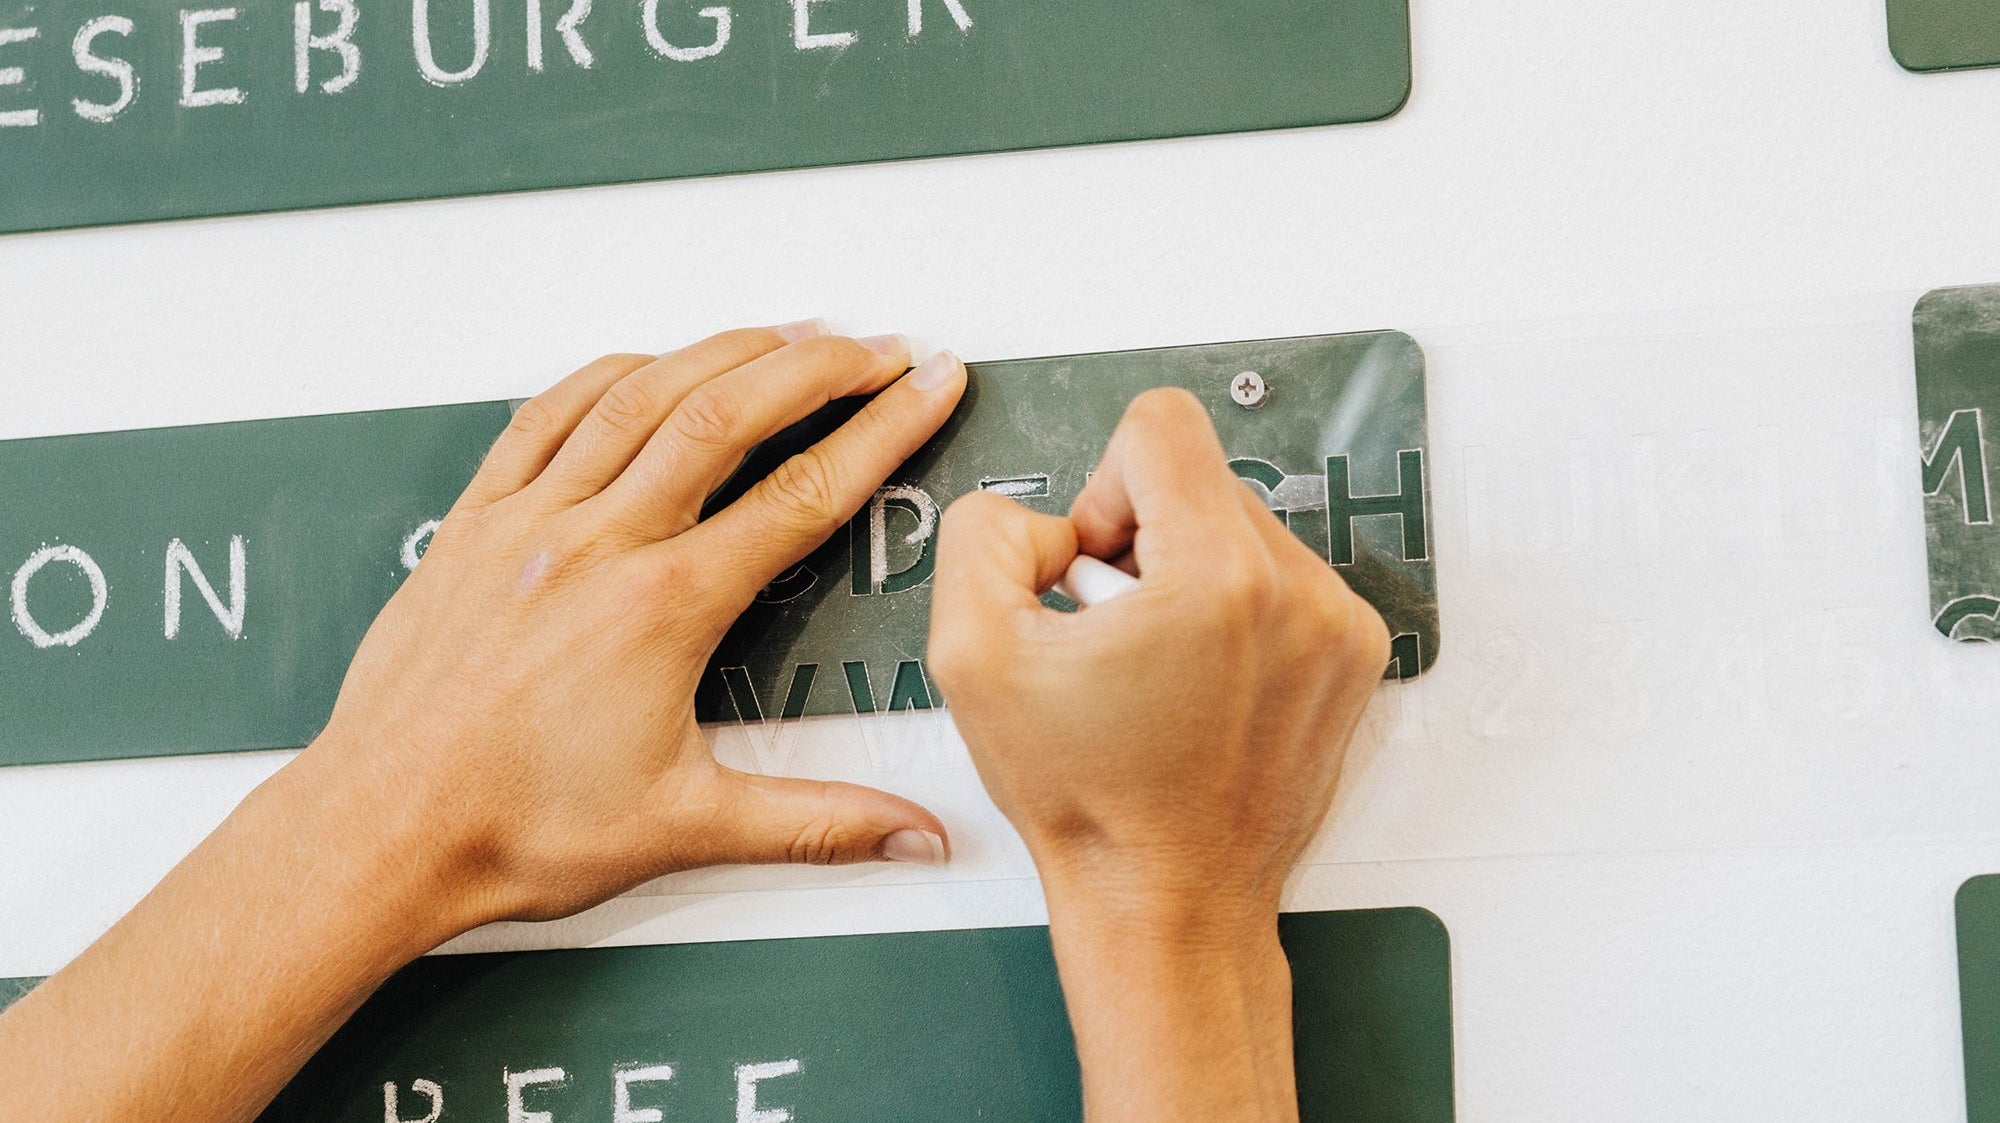 How to Install your Chalkboard Menu